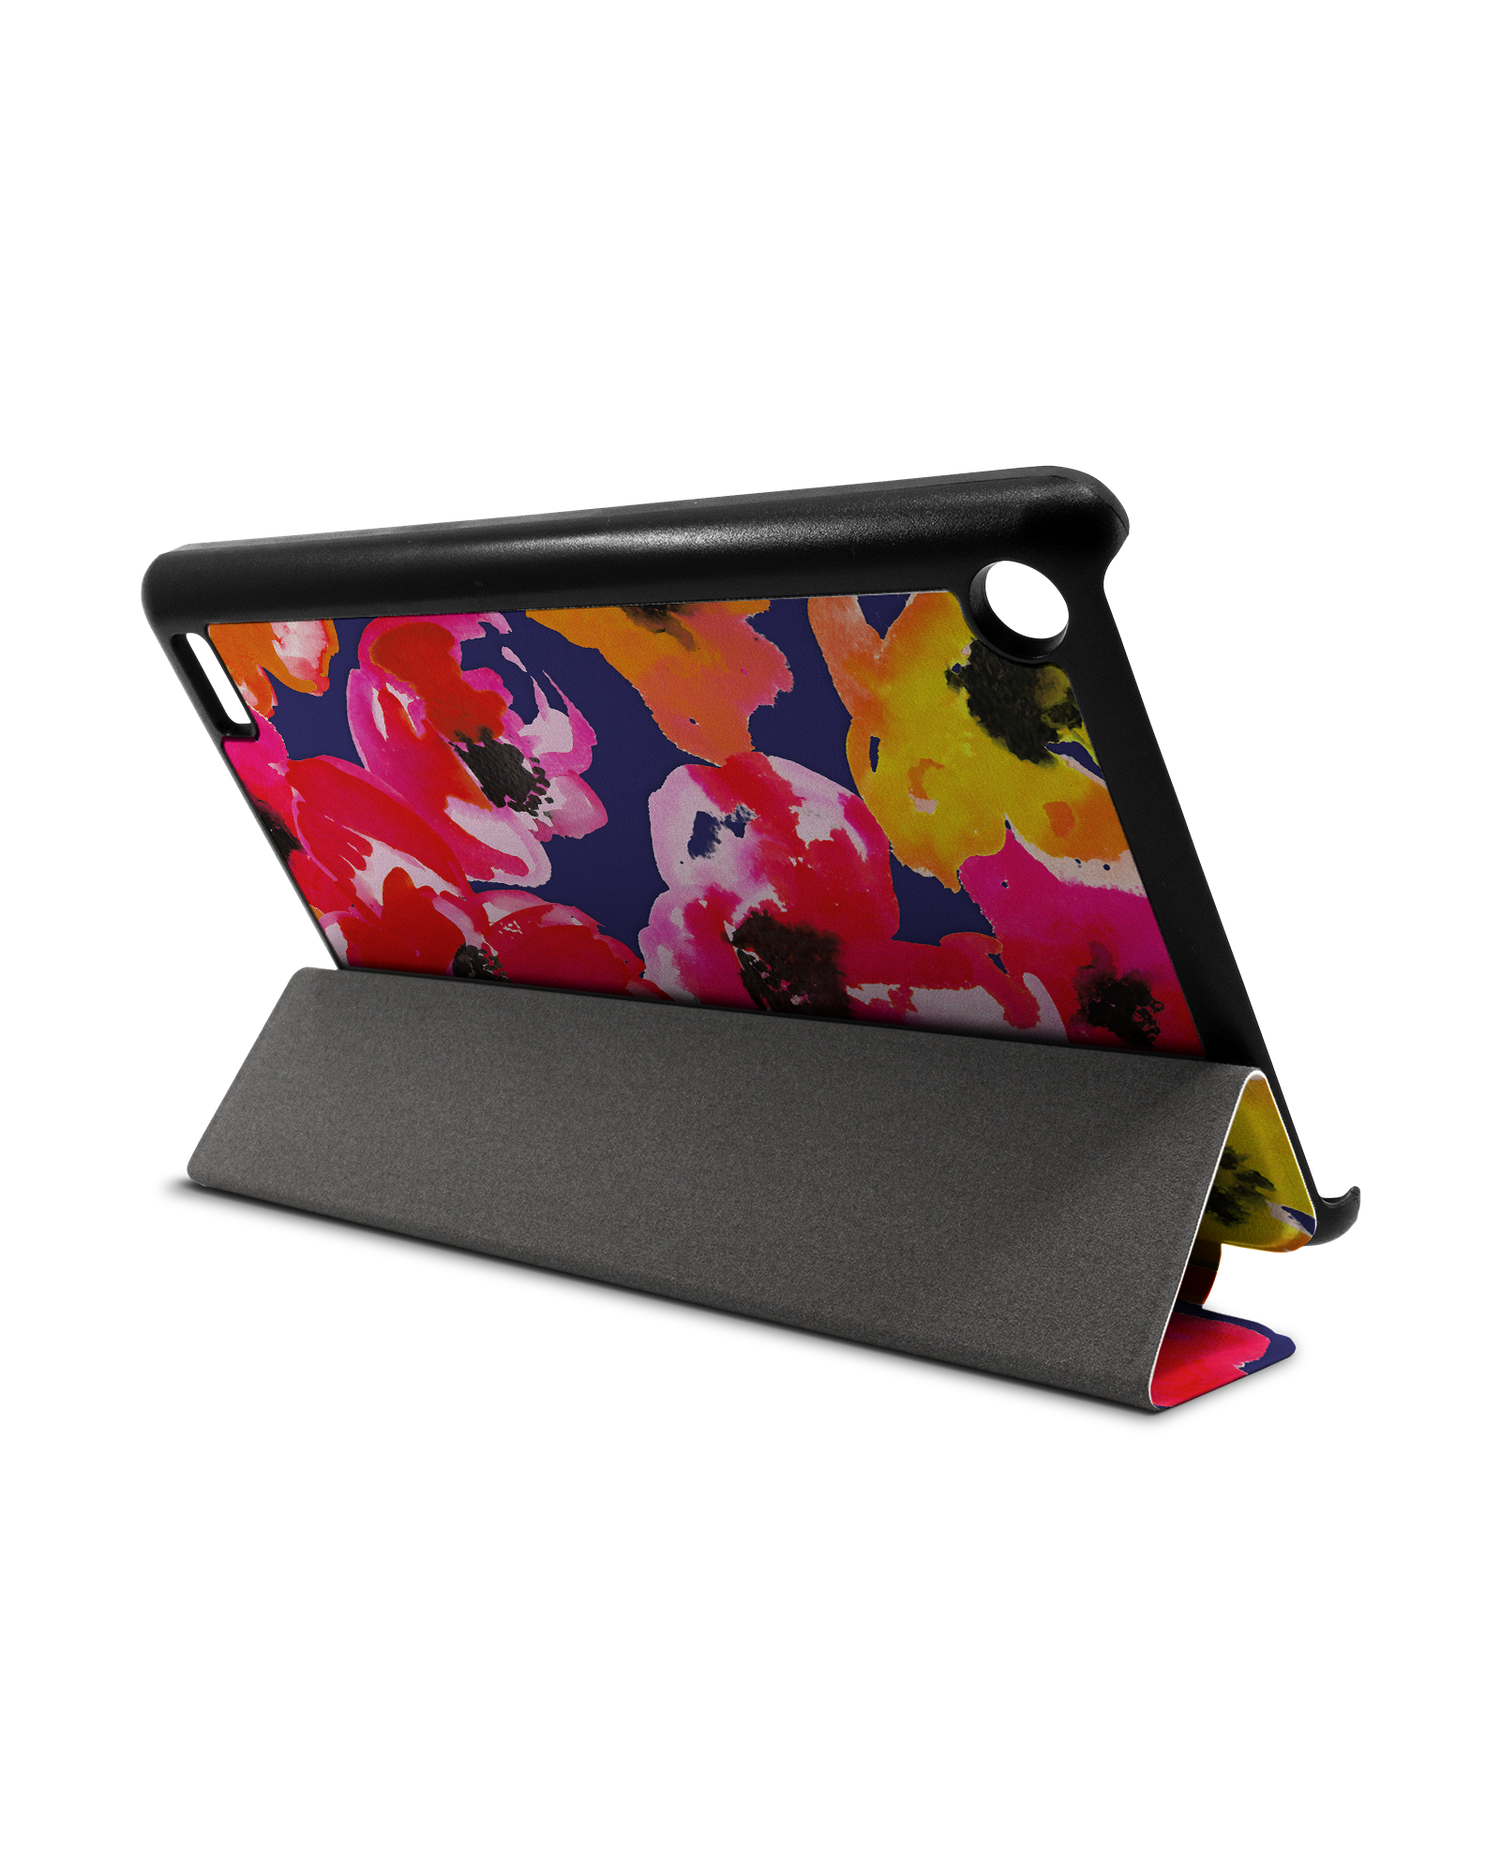 Painted Poppies Tablet Smart Case for Amazon Fire 7: Used as Stand